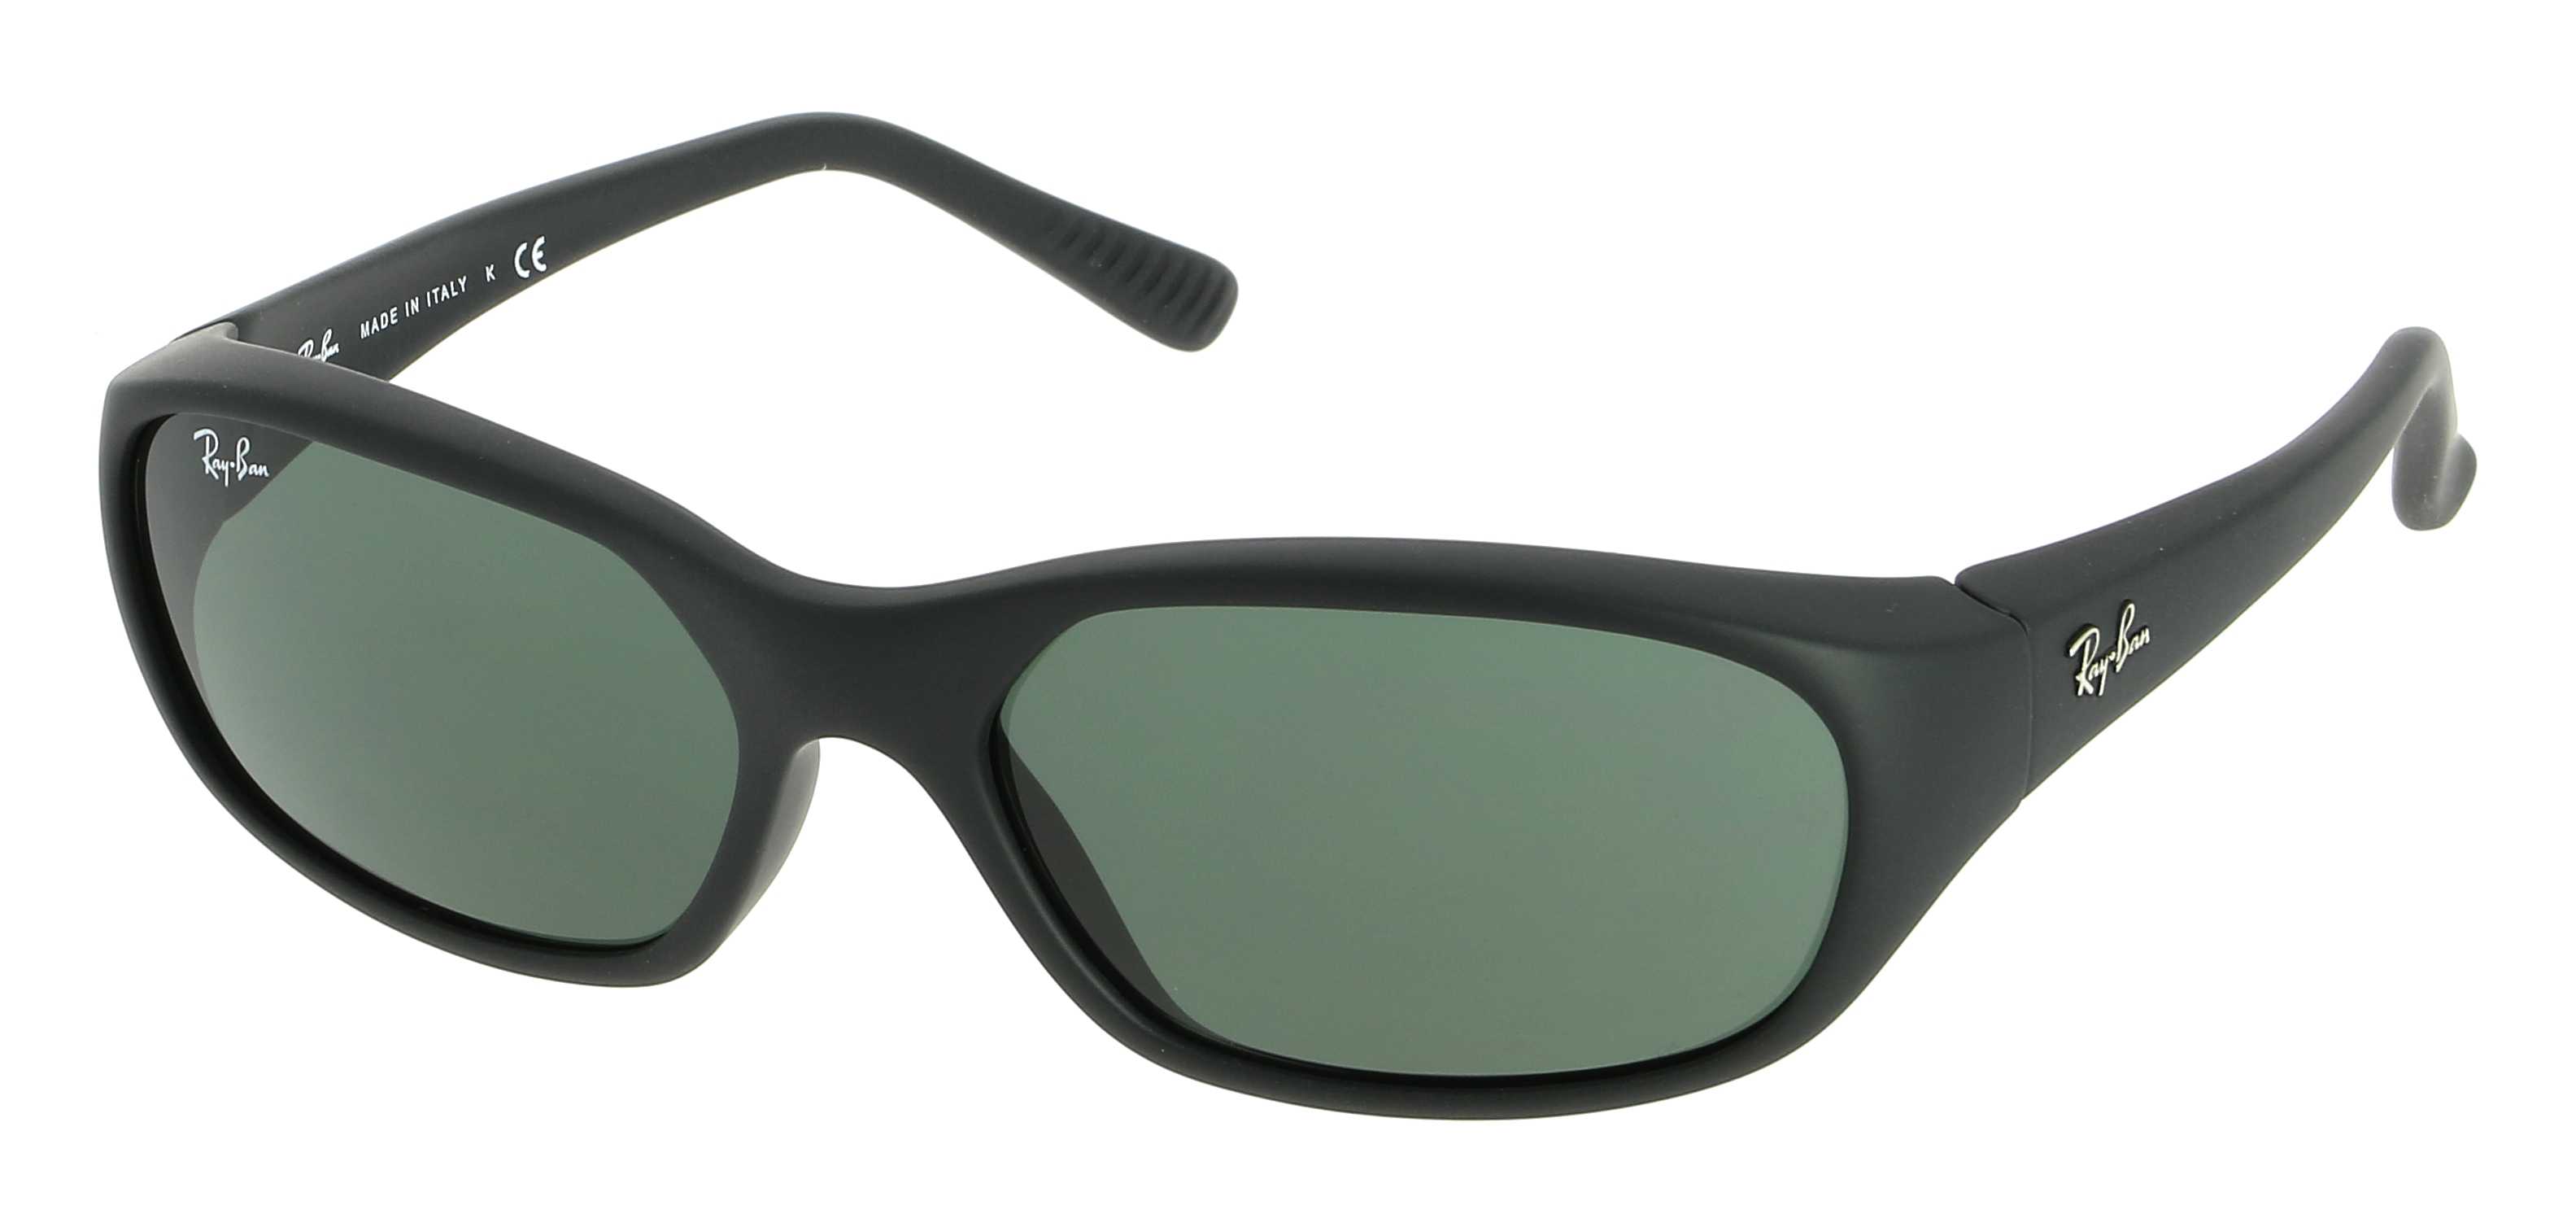 Sunglasses RAY-BAN RB 2016 W2578 Daddy-O 59/17 Man Noir gomme rectangle  frames Full Frame Glasses Classic 59mmx17mm 94$CA